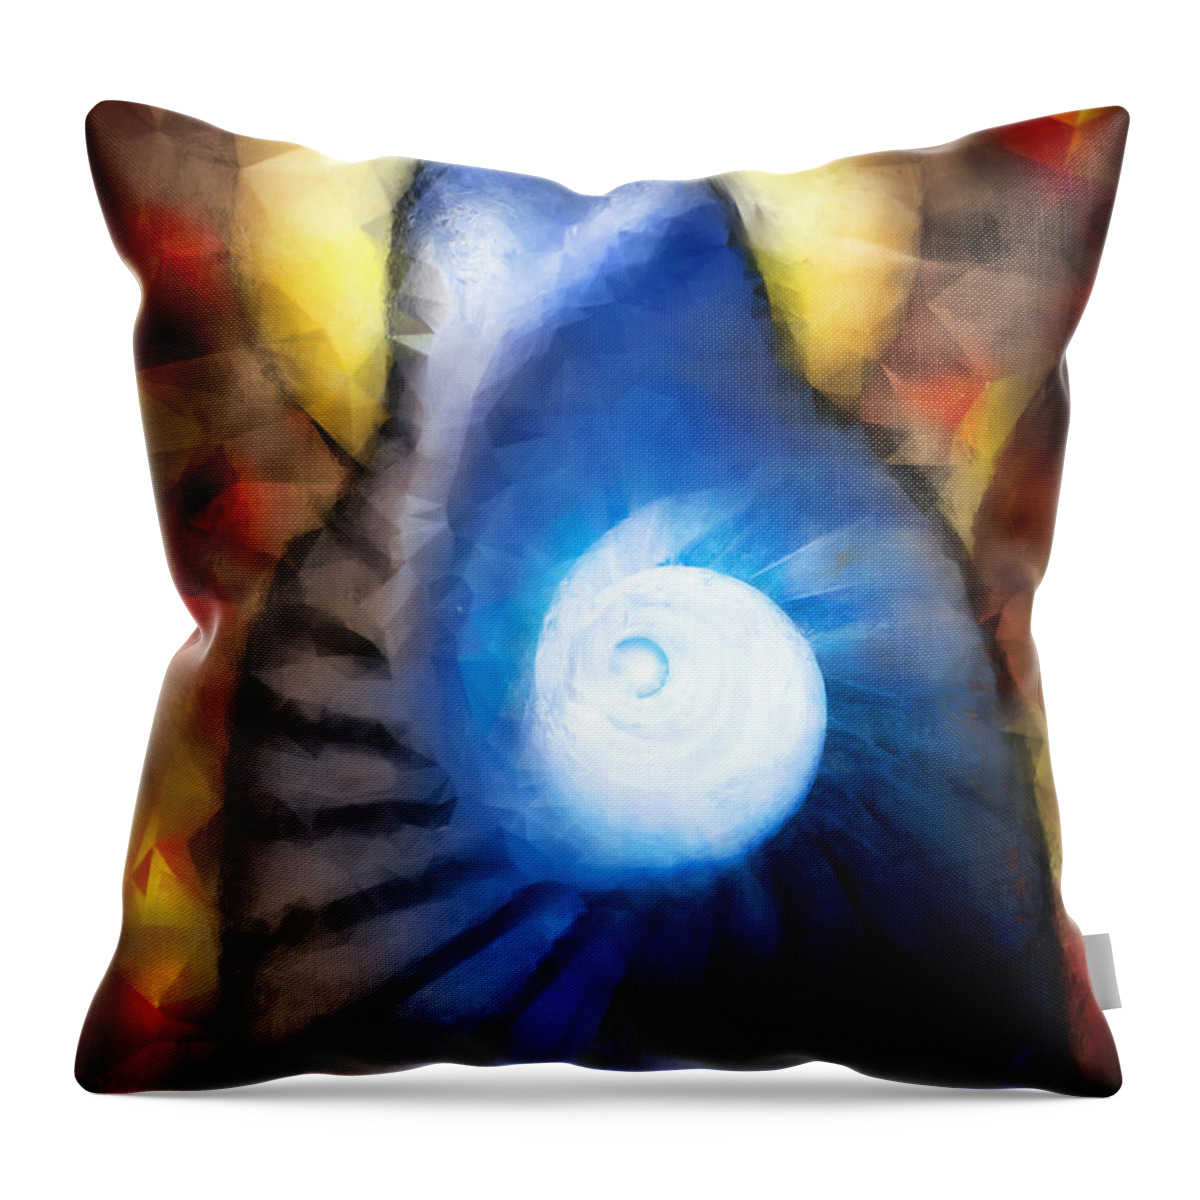 Stairway To Heaven Throw Pillow featuring the painting Stairway To Heaven by Vart Studio